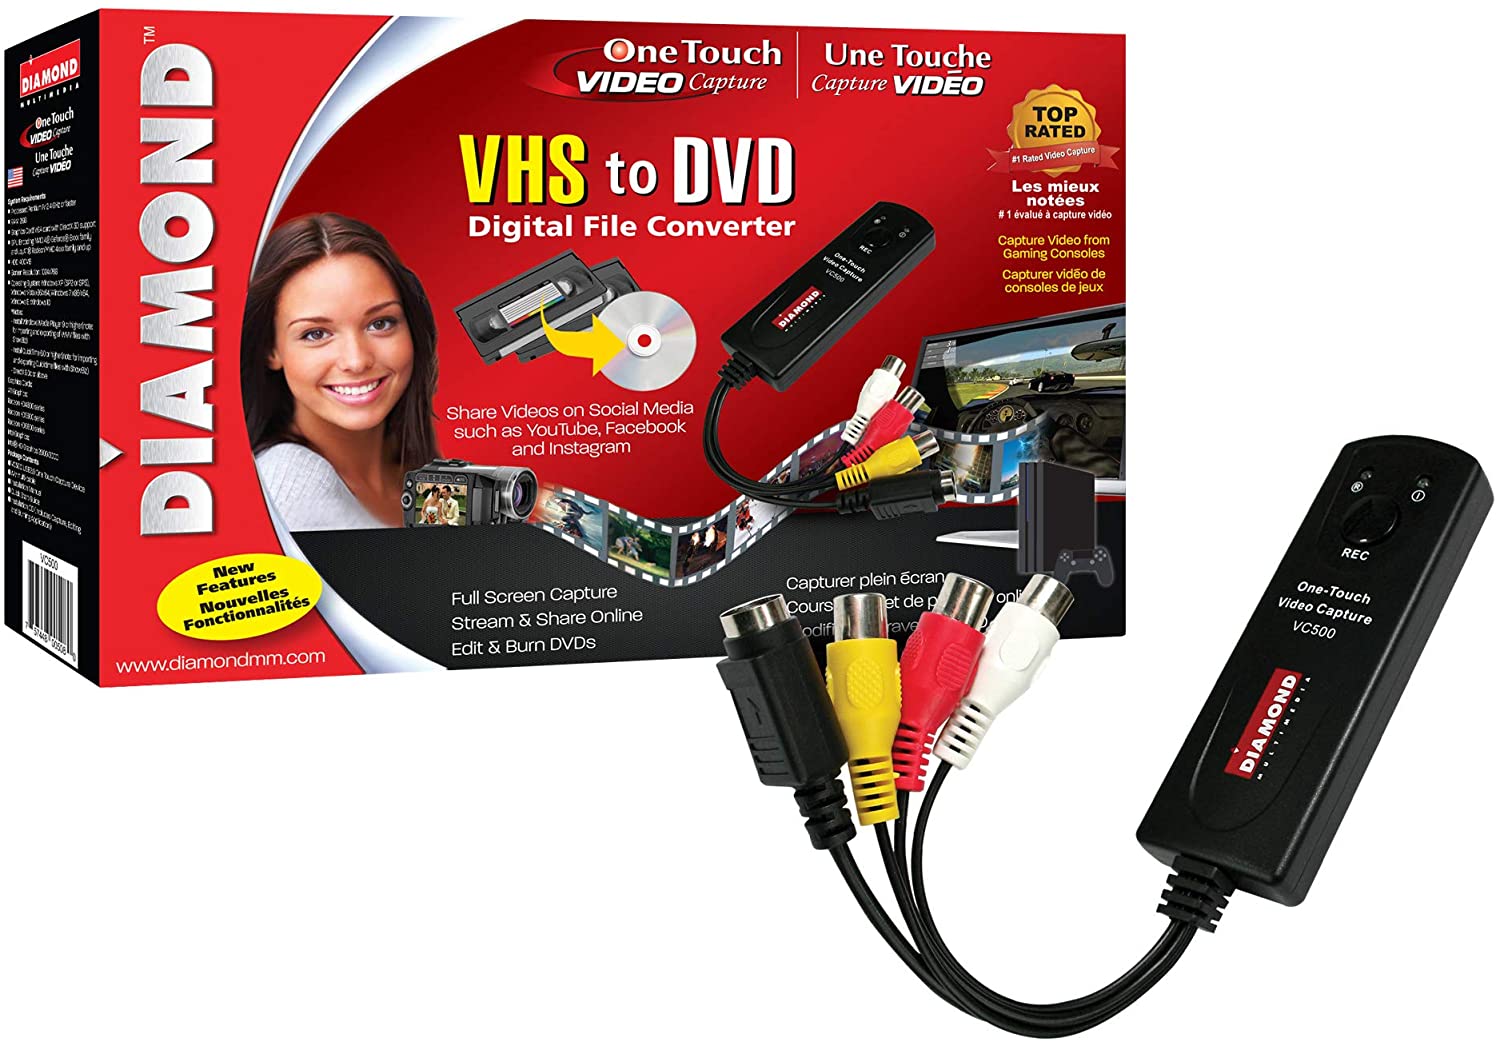 software to convert vhs tapes to digital